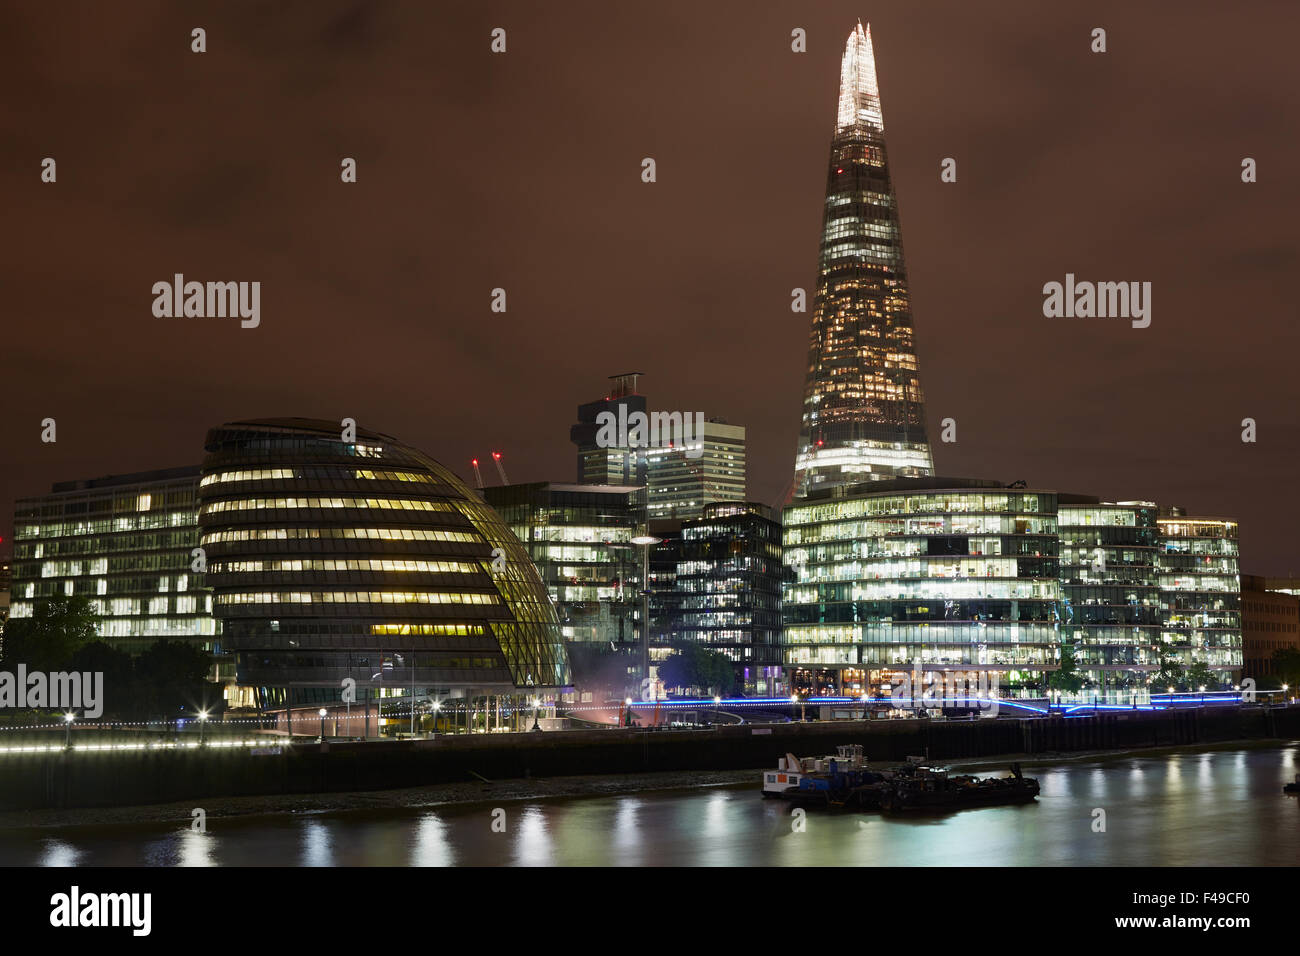 London cityscape with city hall and the Shard with Thames view seen from the Tower bridge at night Stock Photo